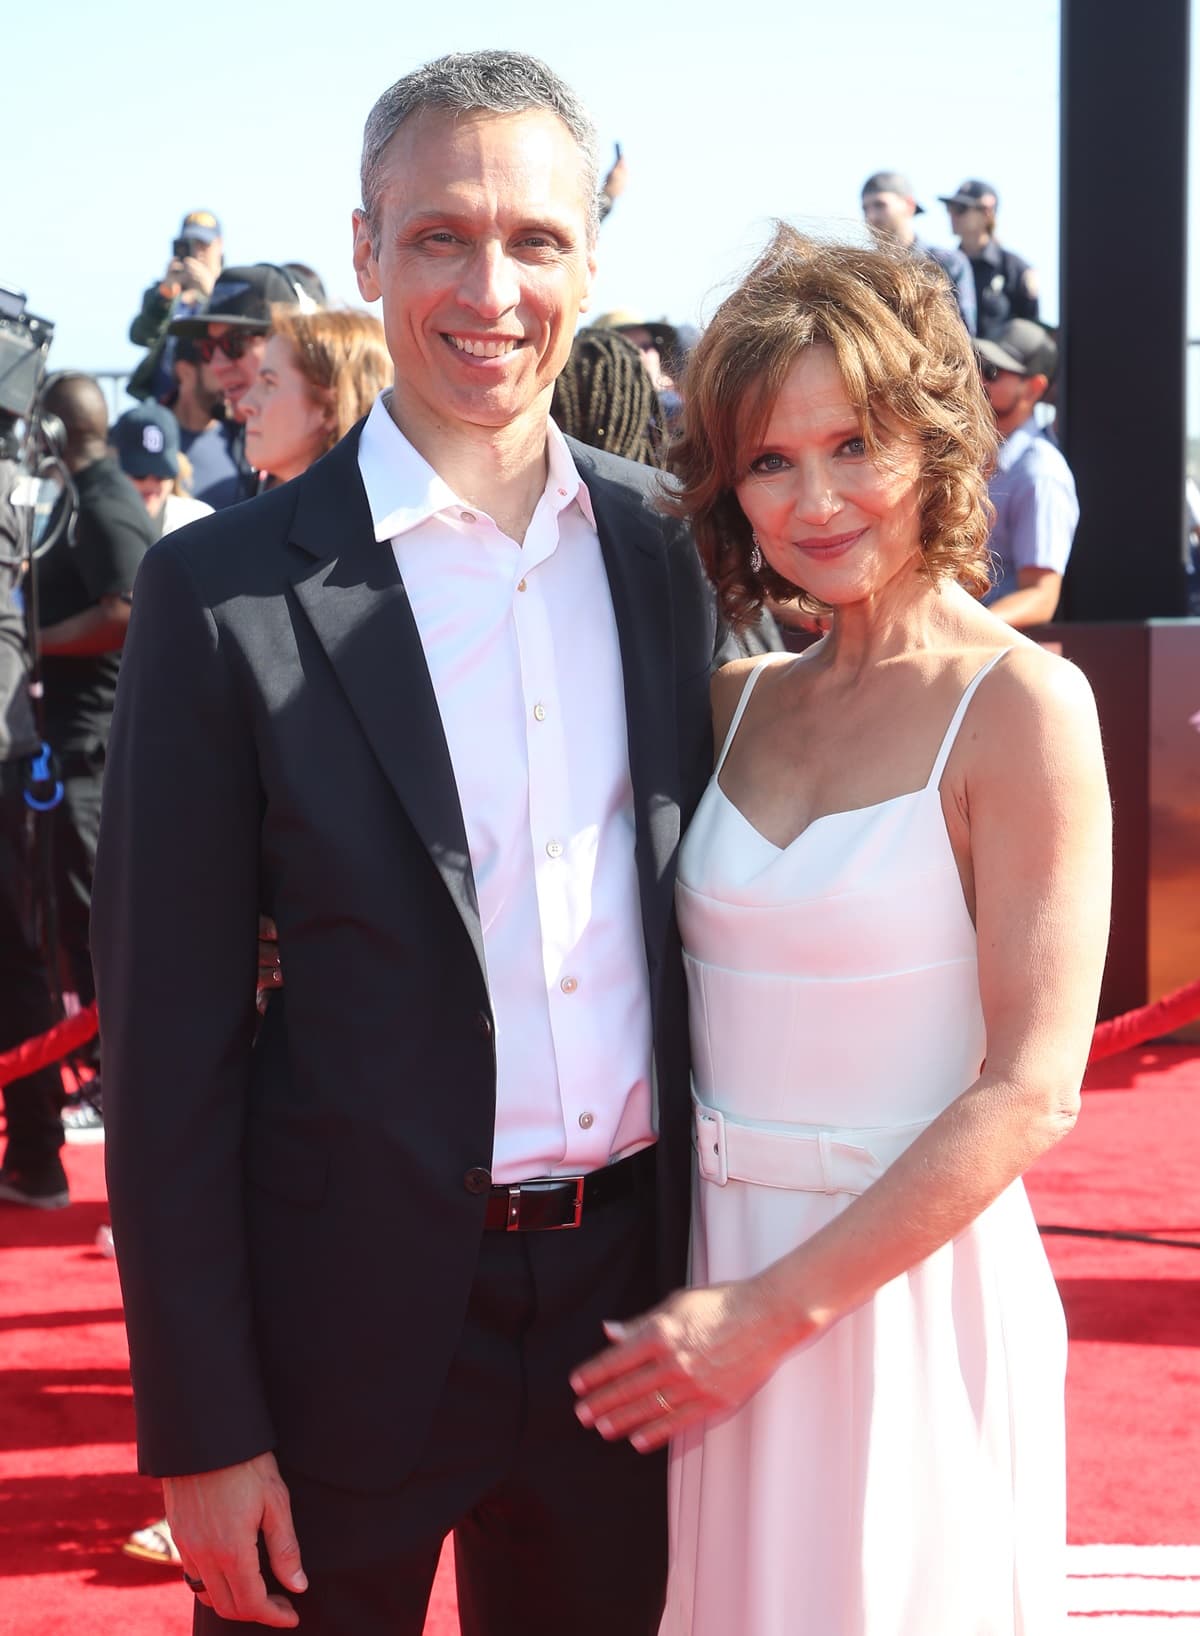 Jean Louisa Kelly, who plays a small role as the wife of Val Kilmer's Iceman, with her husband James Pitaro, at the "Top Gun: Maverick" World Premiere